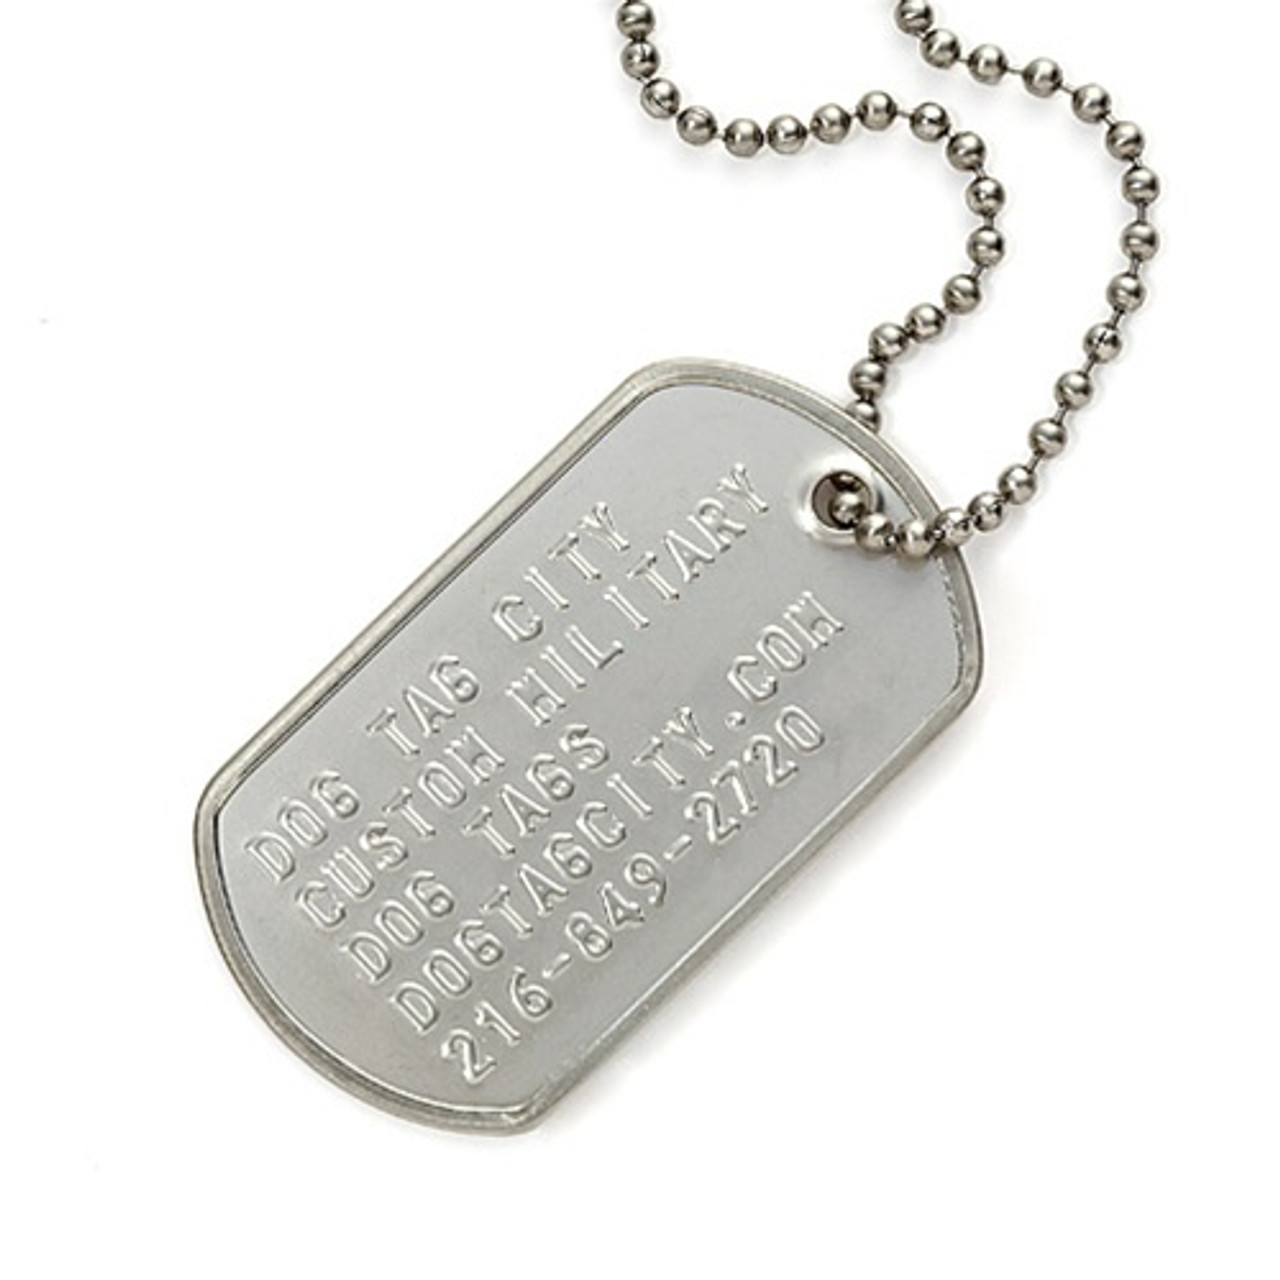 Military Dog Tags, Yes Add Clear Silencers